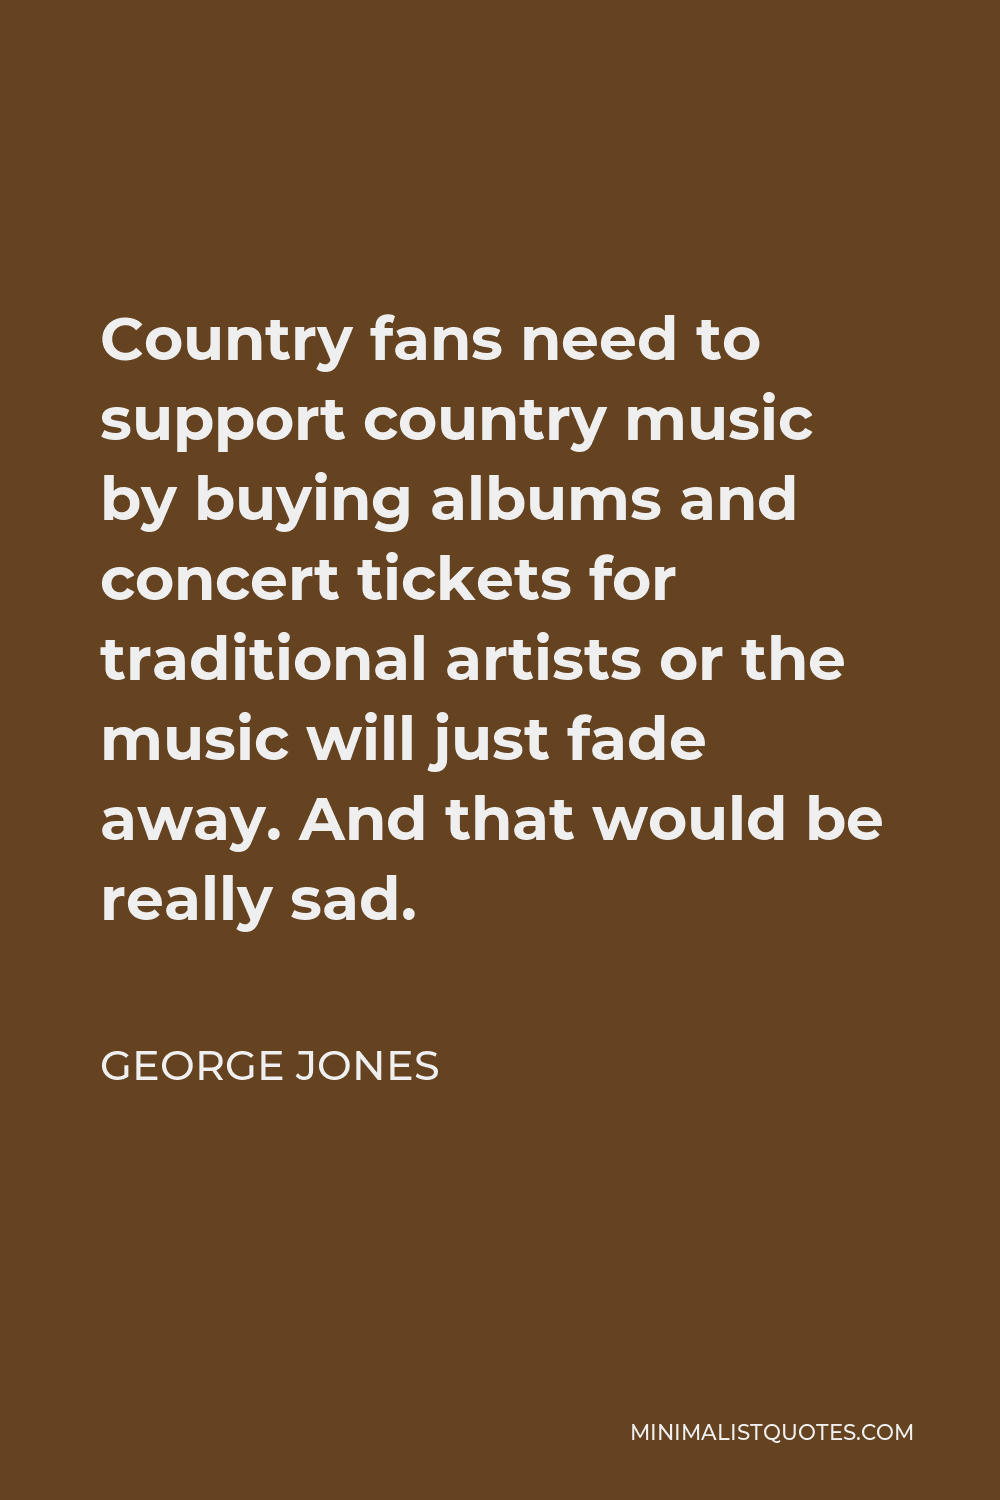 George Jones Quote - Country fans need to support country music by buying albums and concert tickets for traditional artists or the music will just fade away. And that would be really sad.